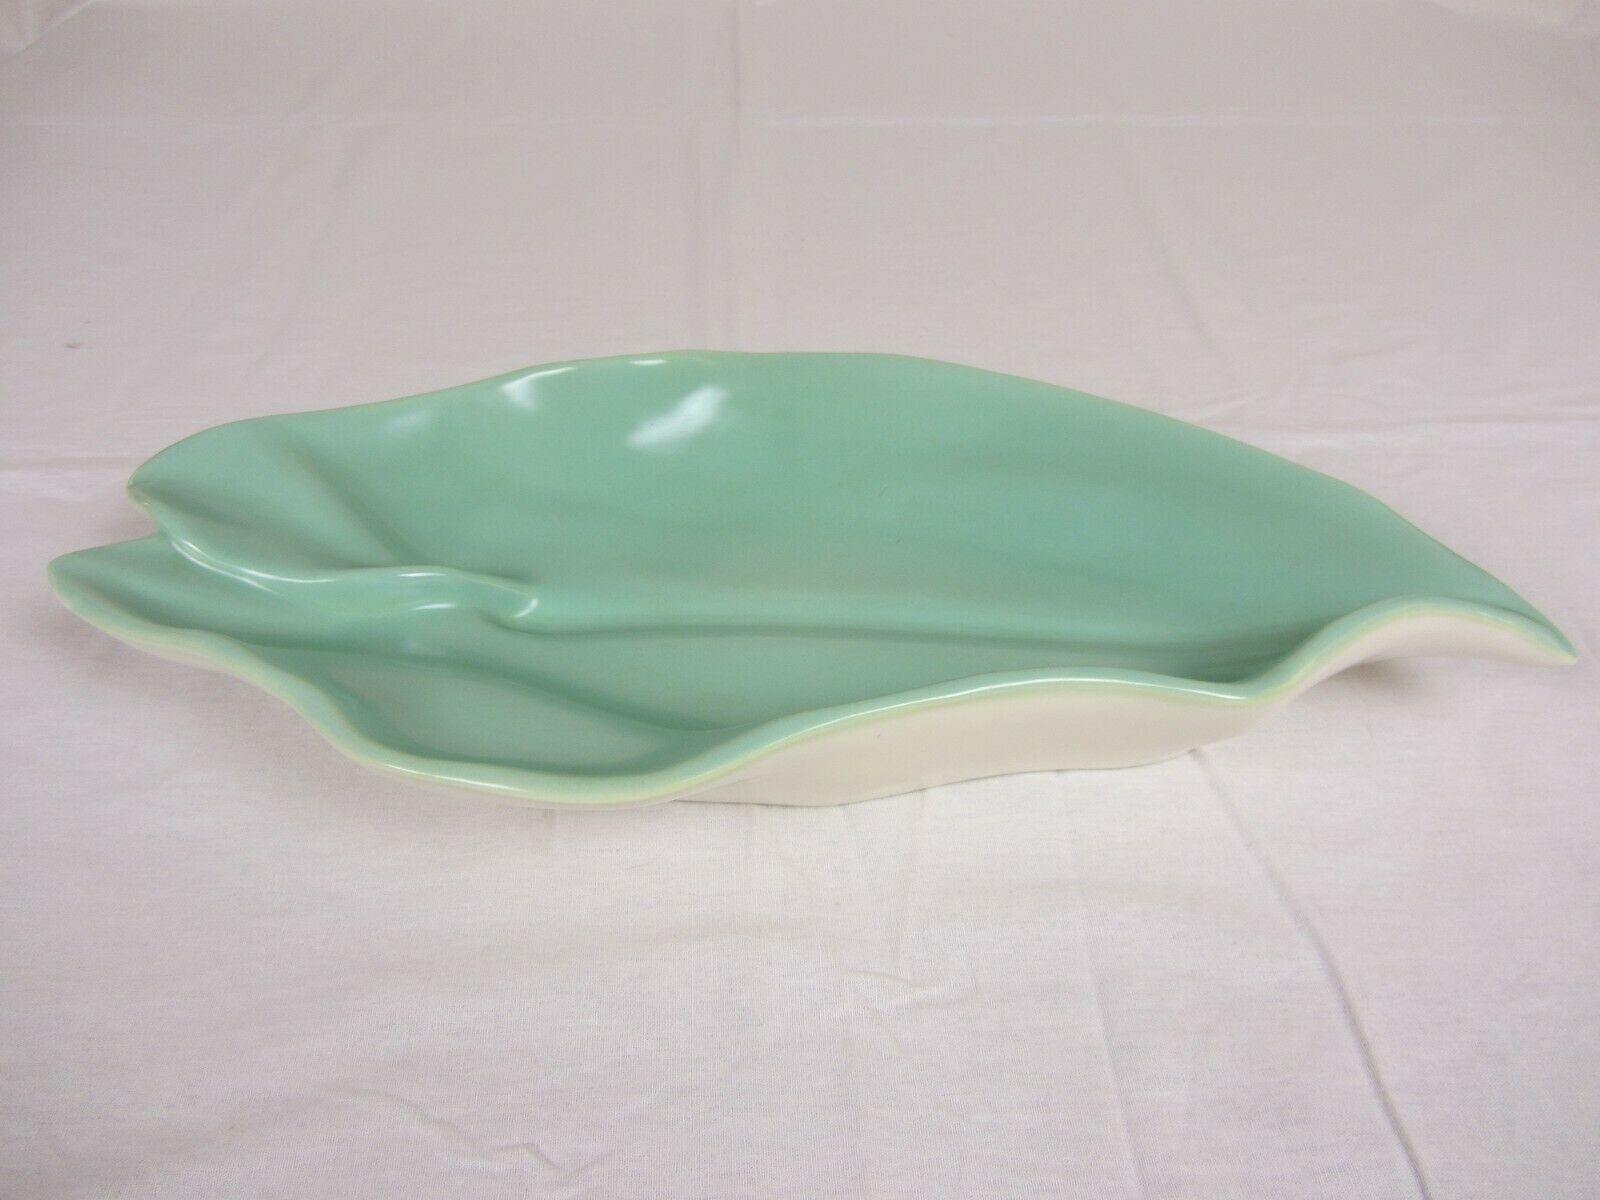 Catalina Pottery Turquoise Aquamarine Leaf Tray Plate Vintage Used 16 Inches